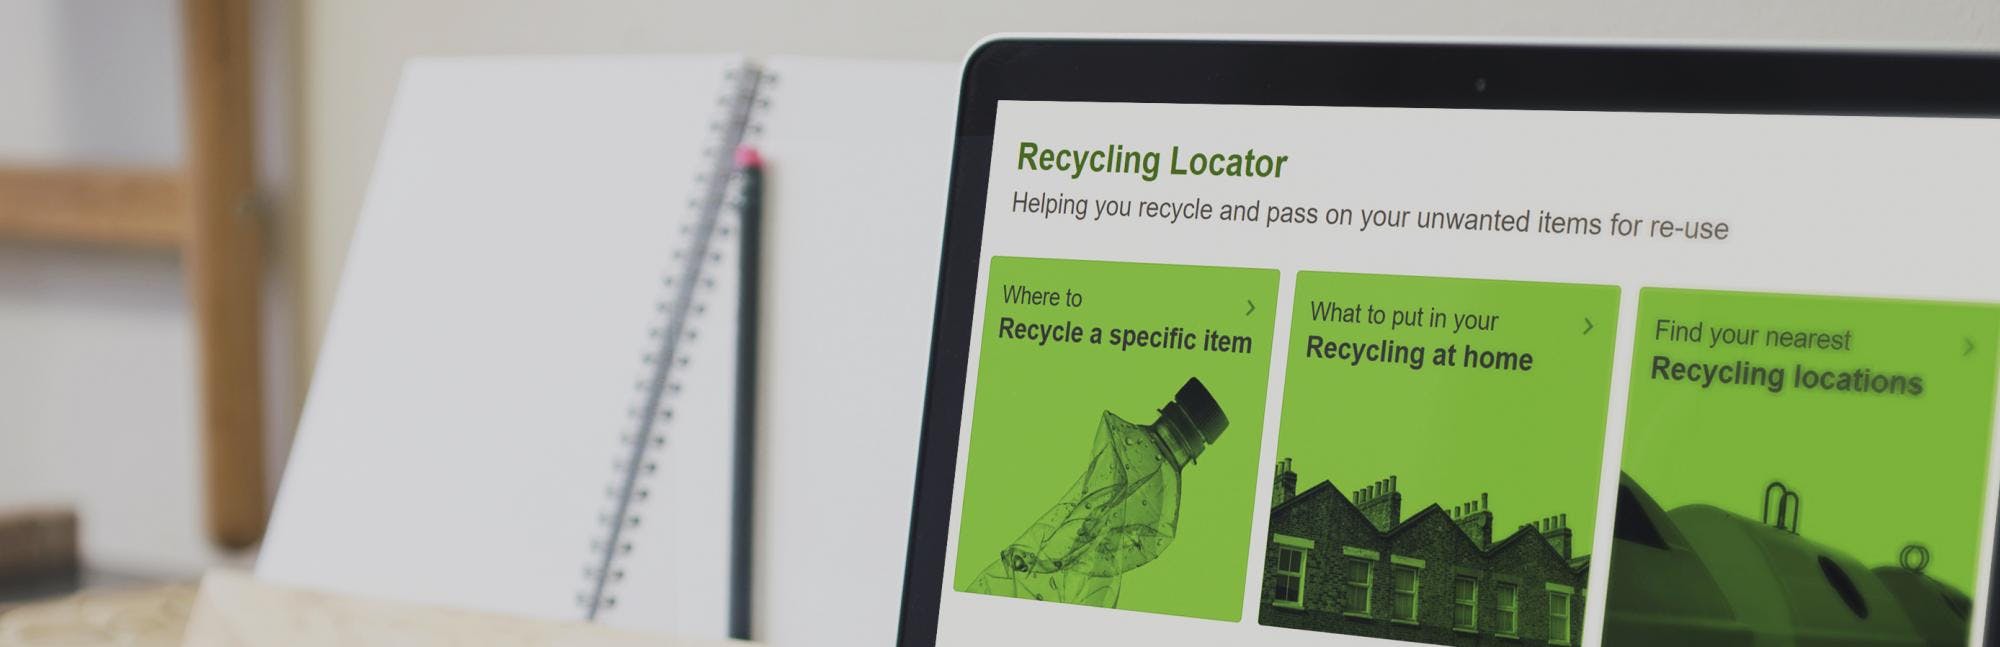 Laptop screen showing recycling locator